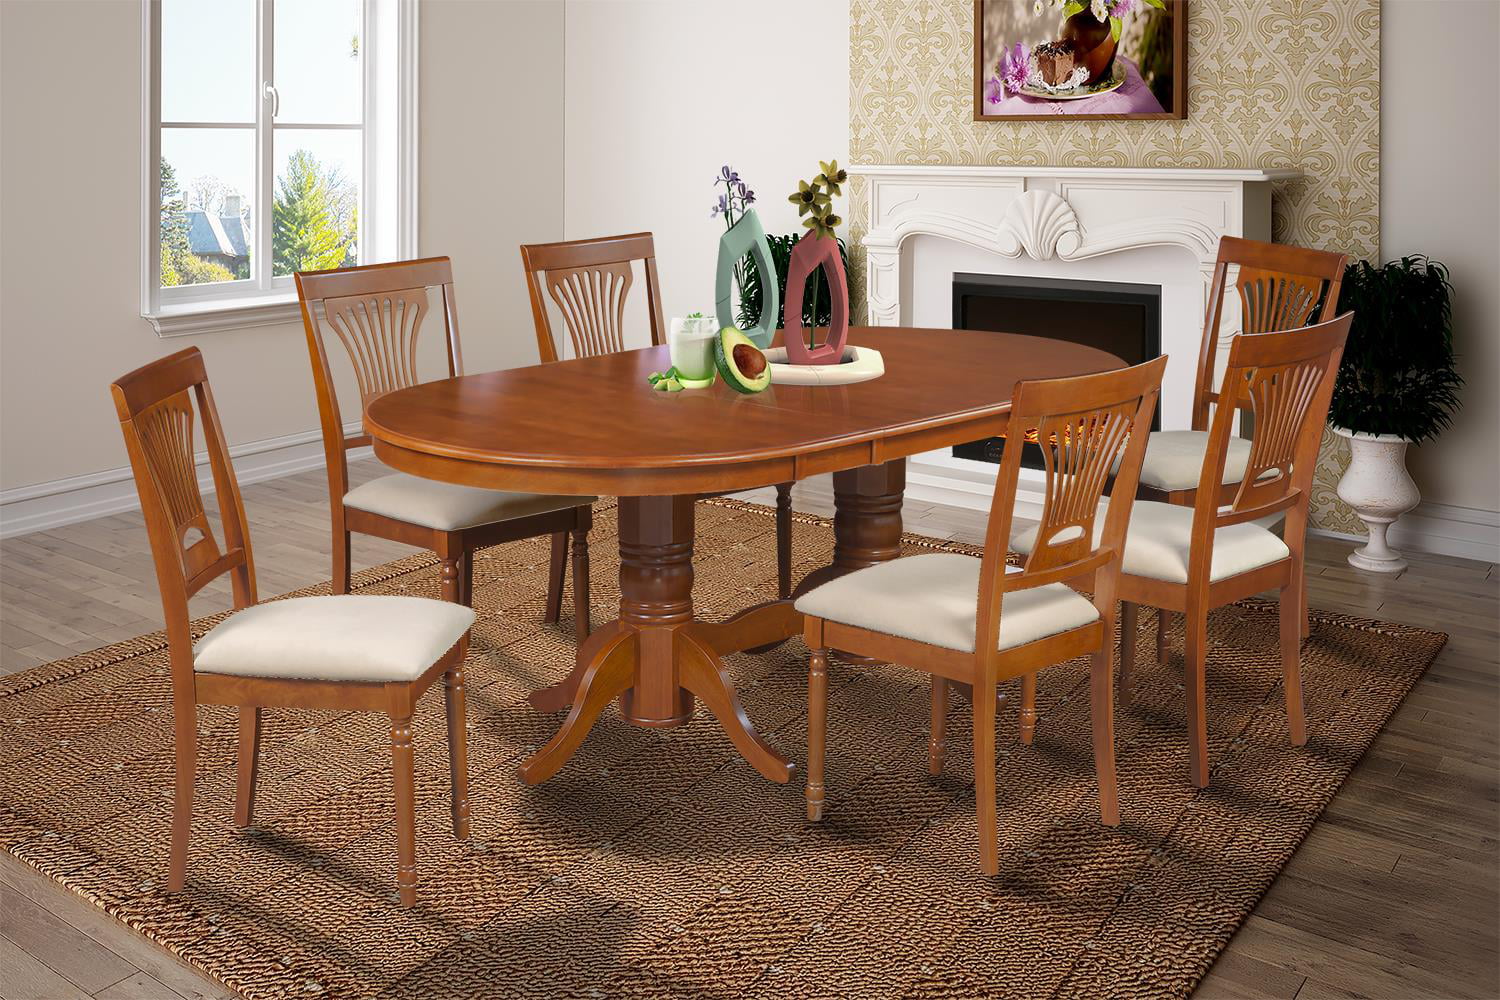 7 Piece Dining Room Set Table With A Butterfly Leaf And 6